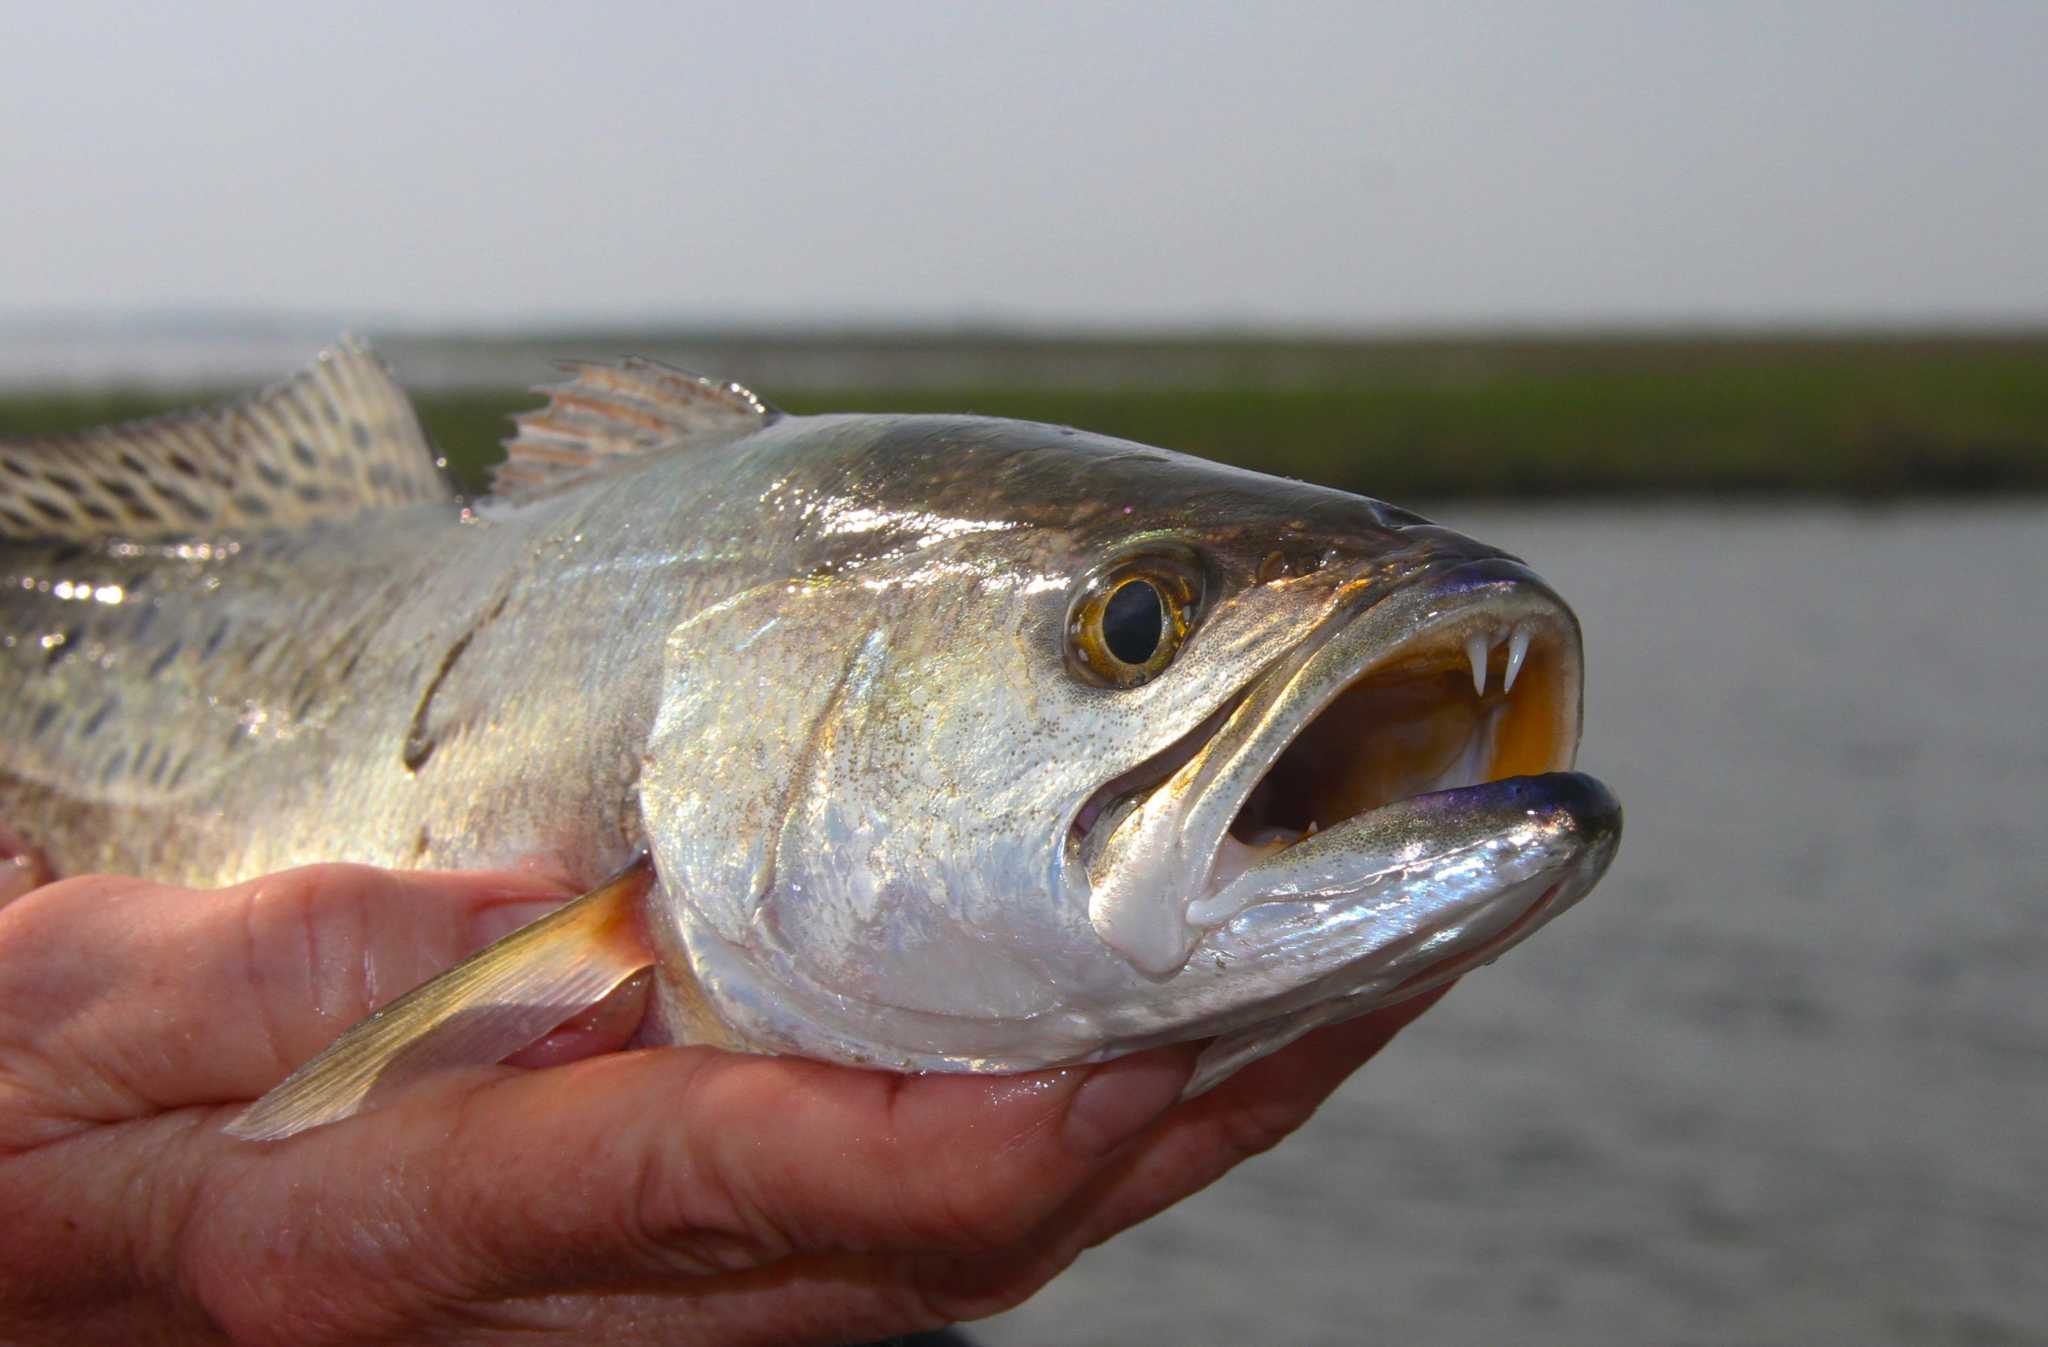 Changes to Texas’ speckled trout regulations approved by TPW Commission